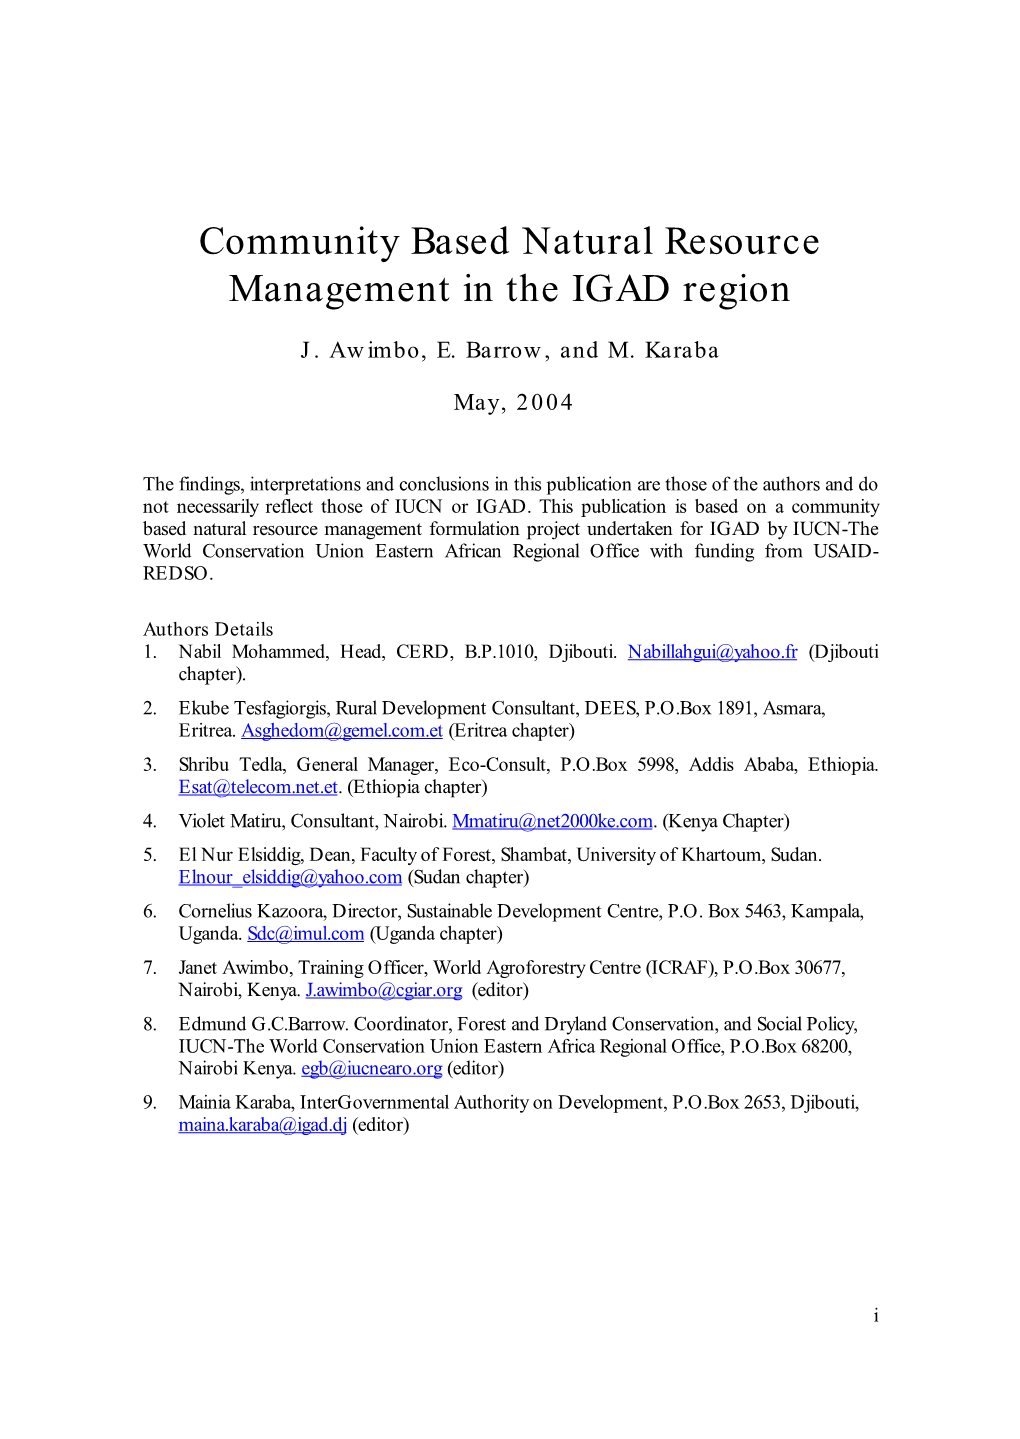 Community Based Natural Resource Management in the IGAD Region